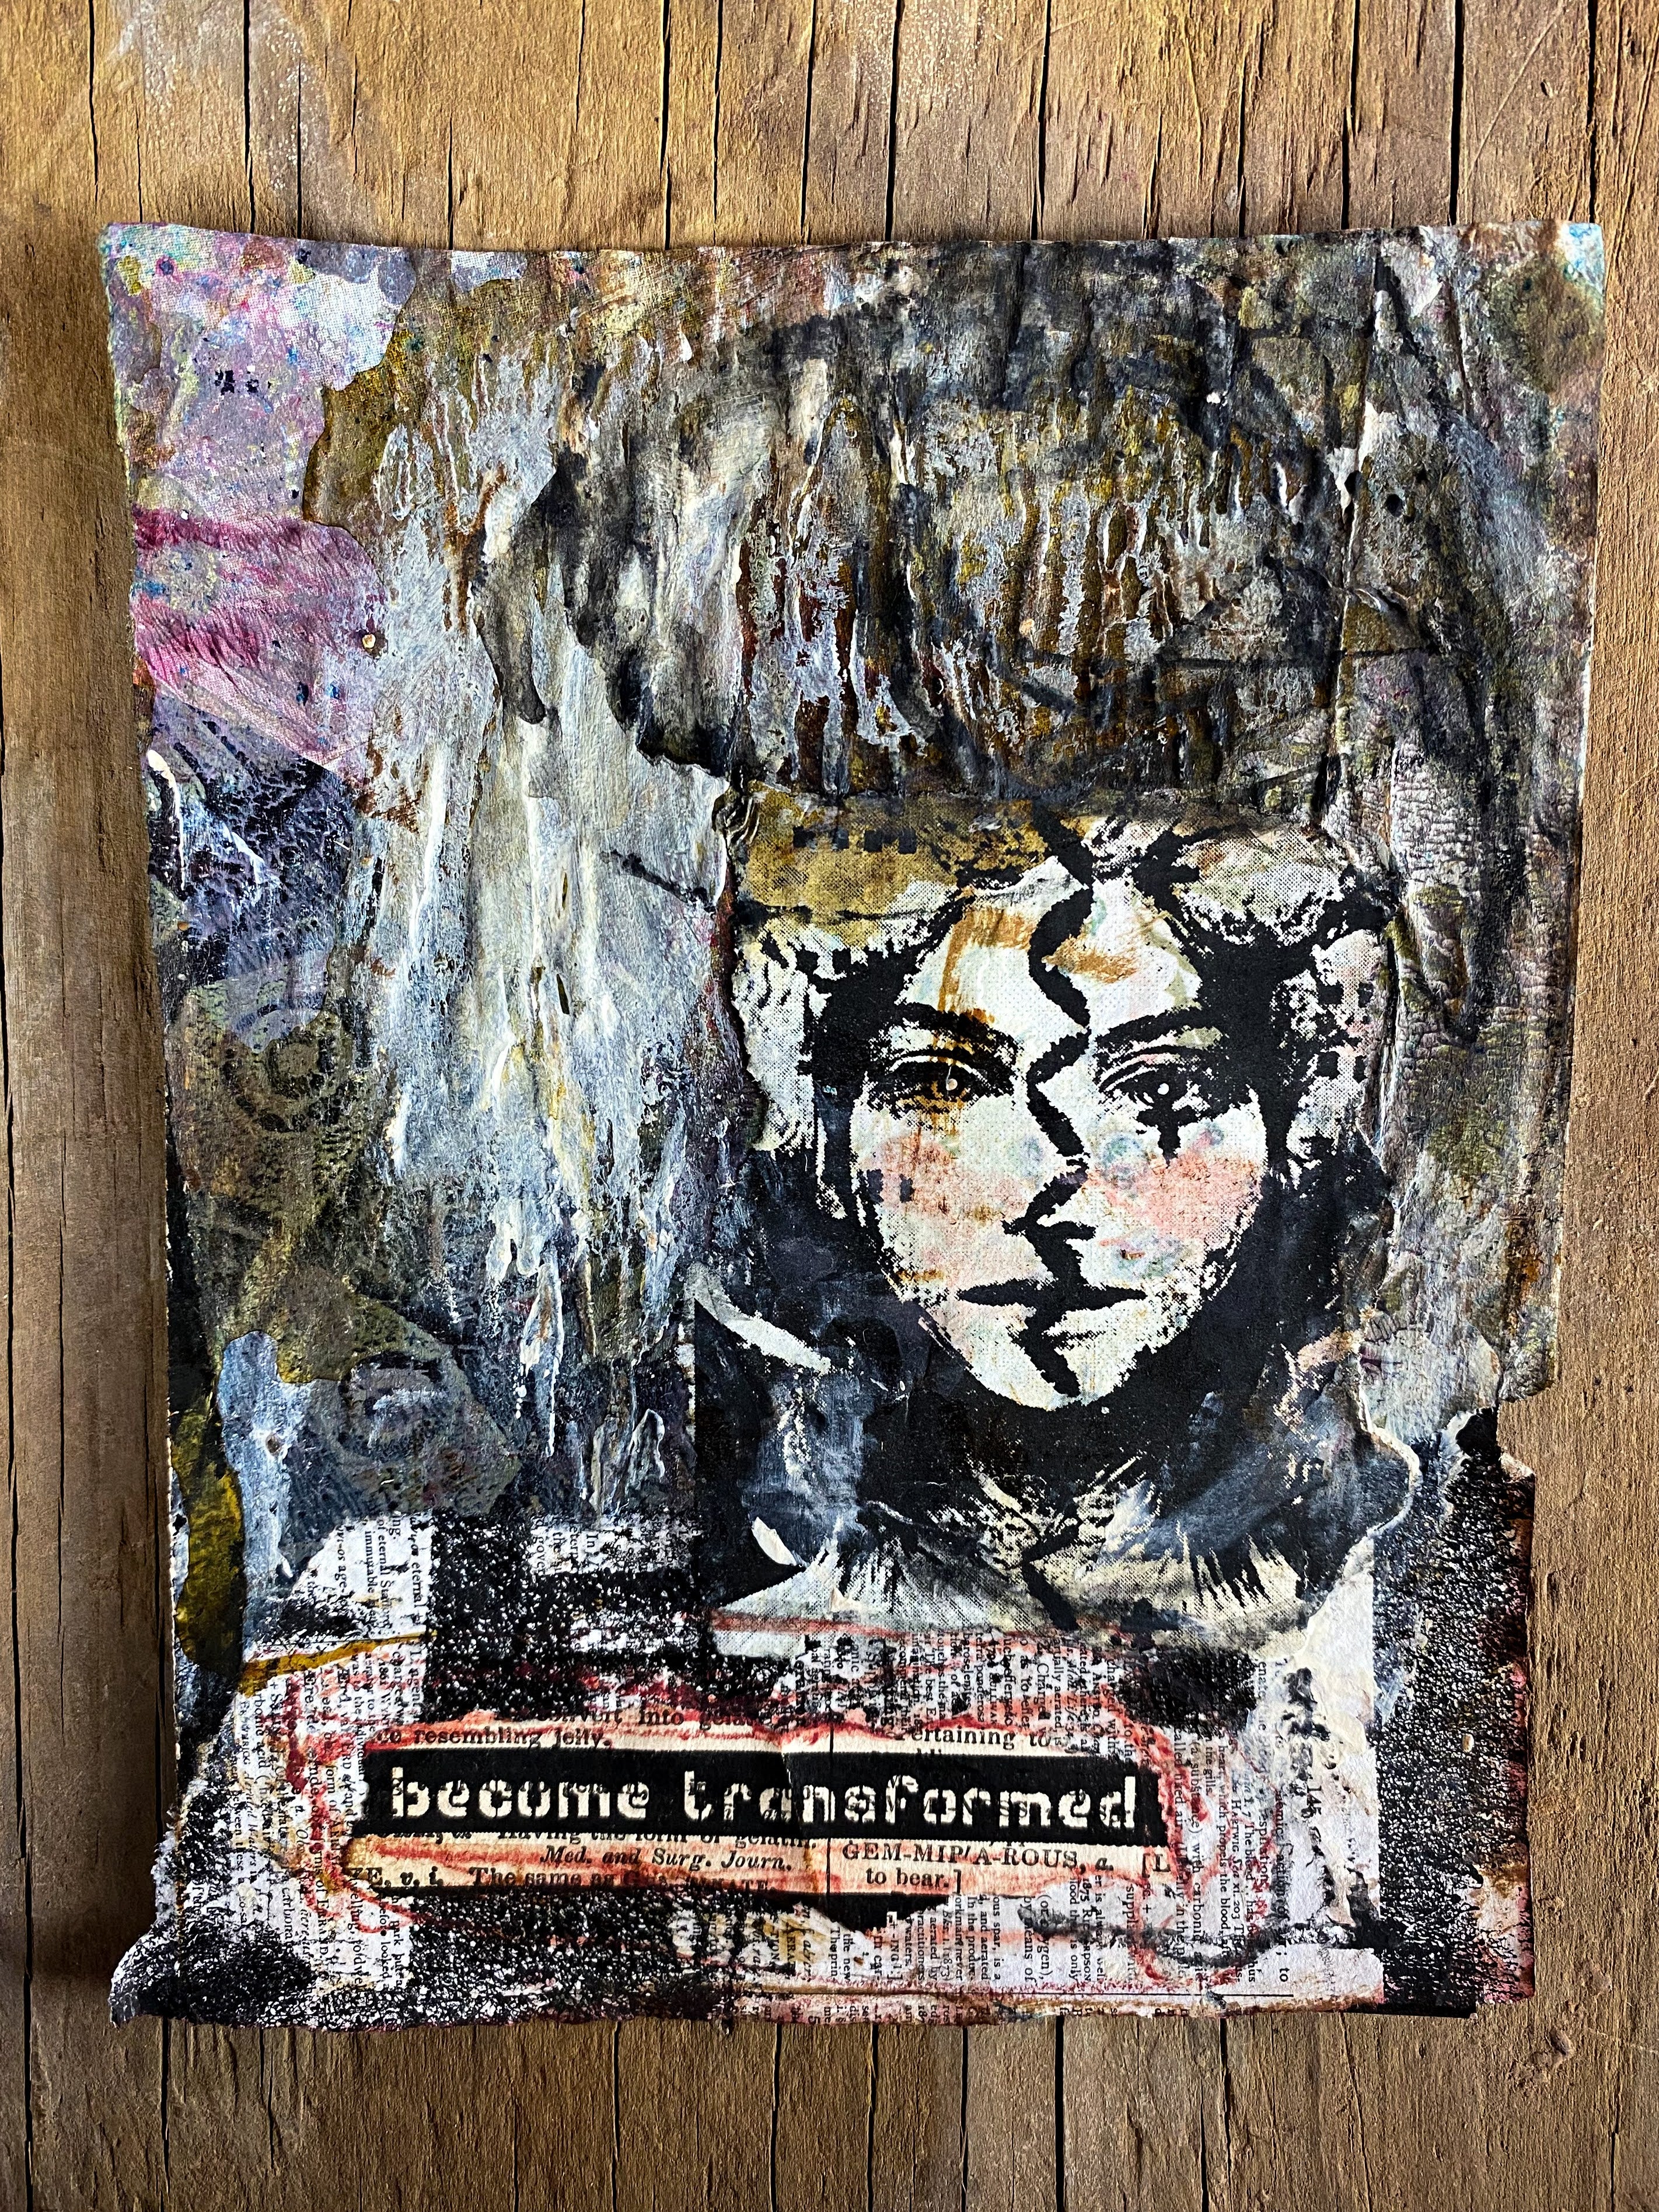 Become Transformed - Original Mixed Media Collage